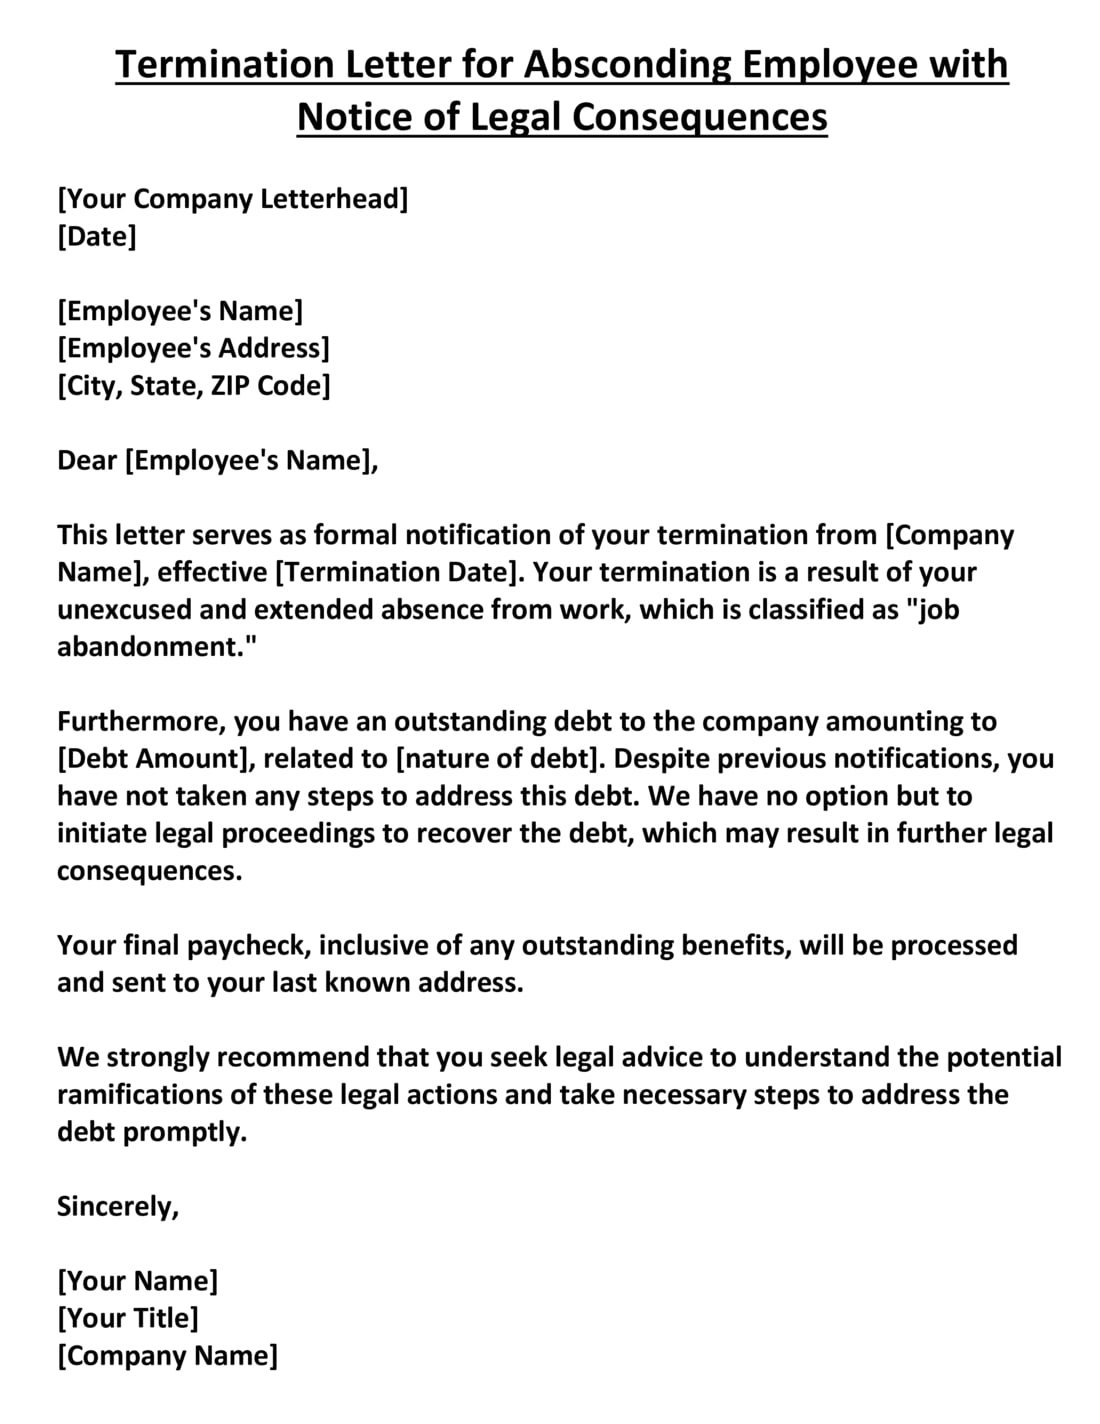 Termination Letter for Absconding Employee with Notice of Legal Consequences